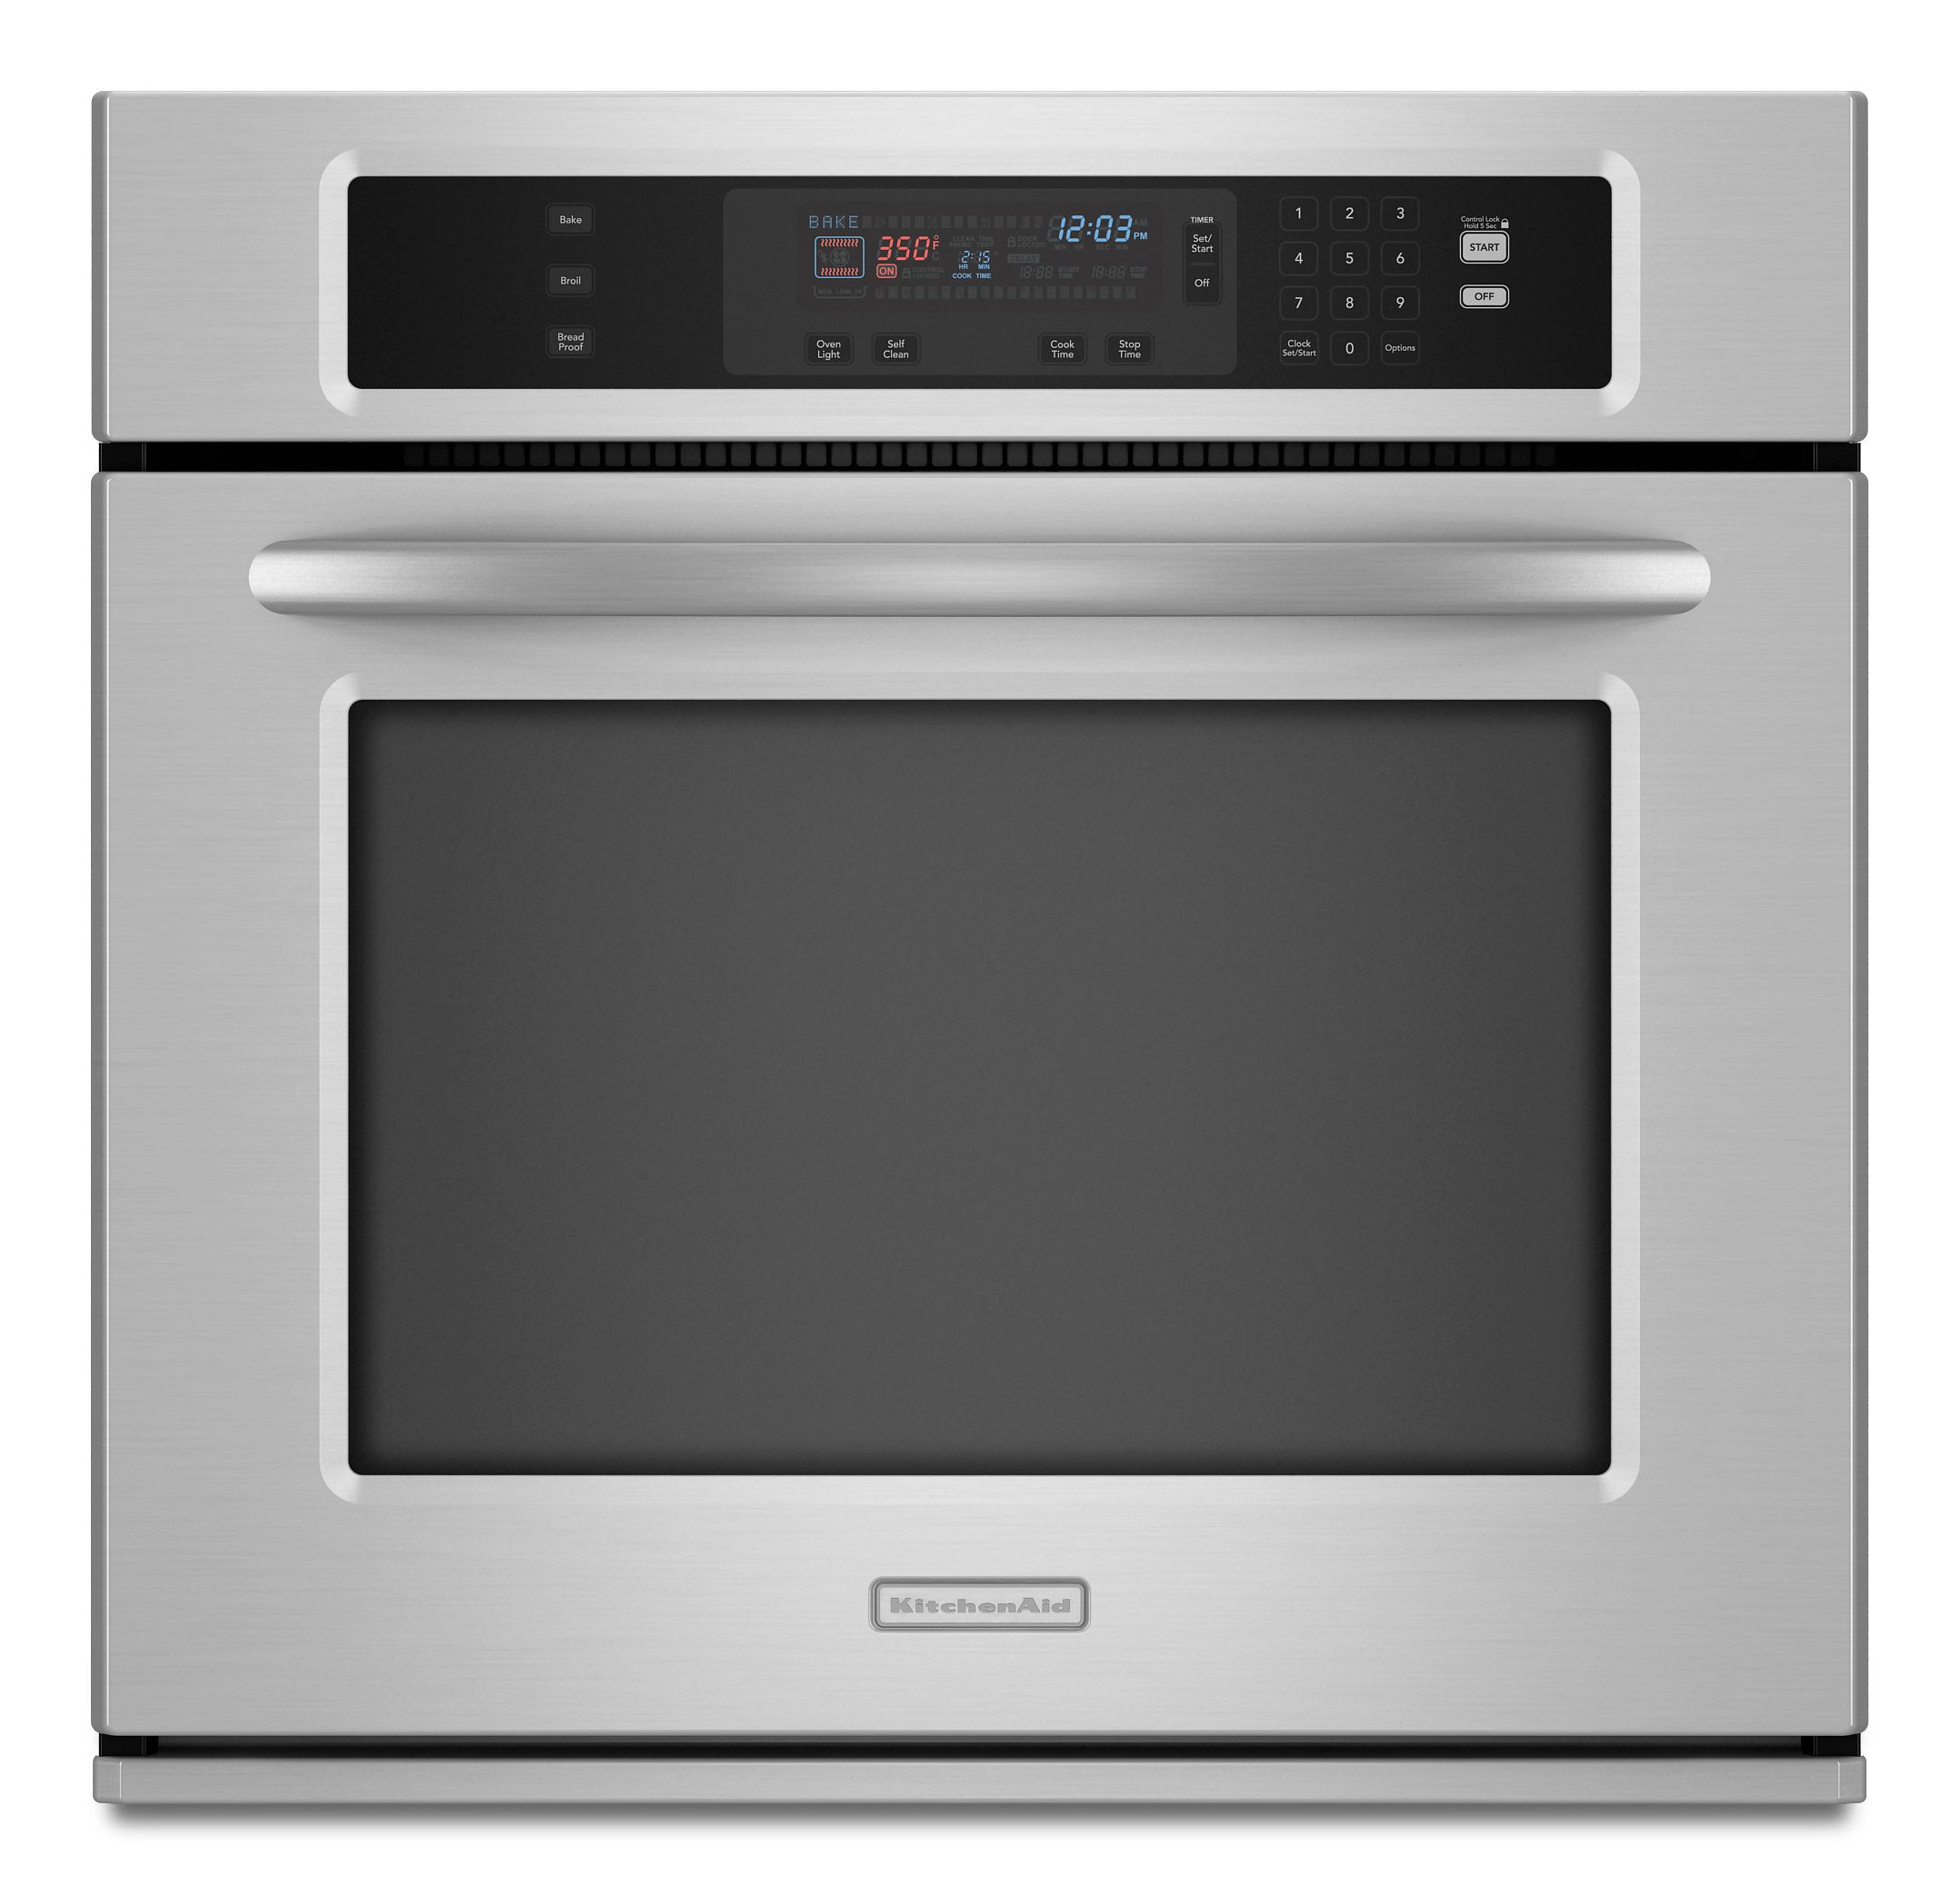 Kitchen Aid Wall Ovens
 KitchenAid Electric Single Wall Oven 27 in KEBK171SSS Sears